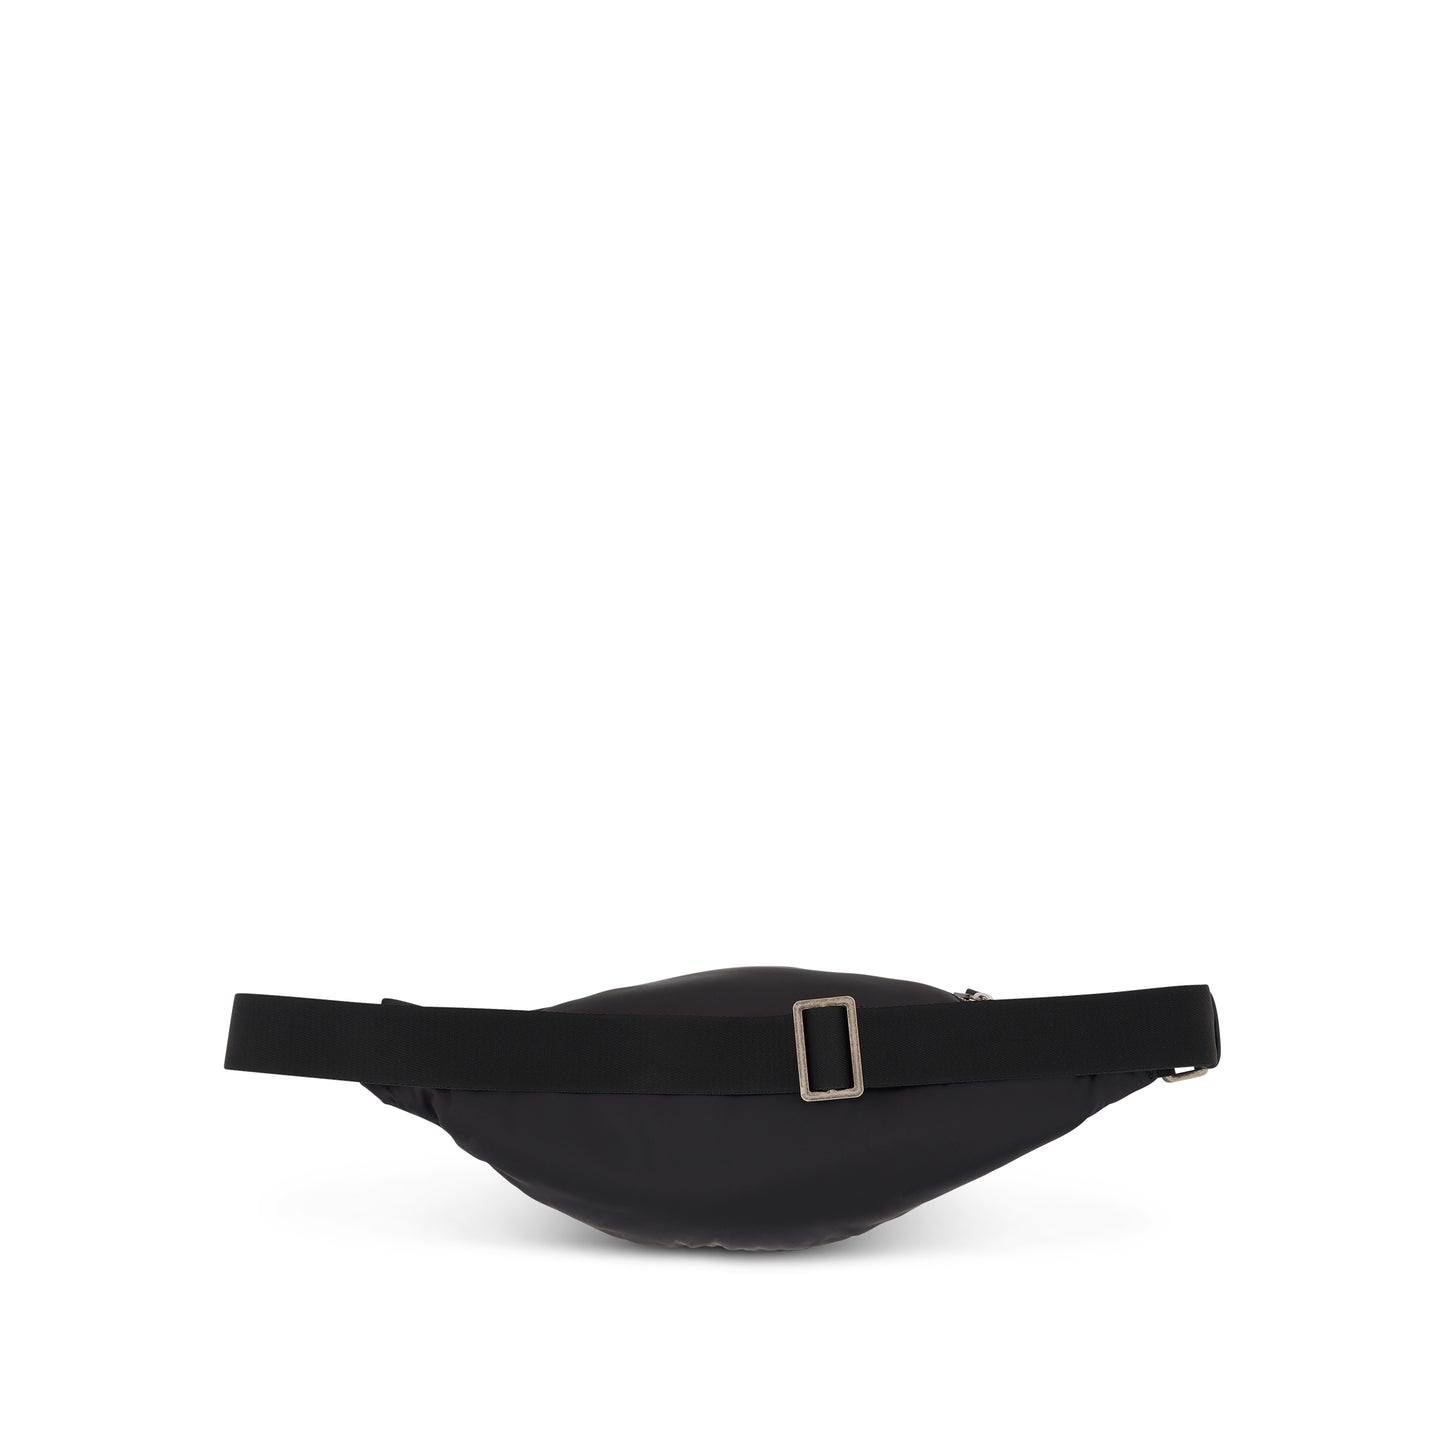 Curved Logo Fannypack in Black/White